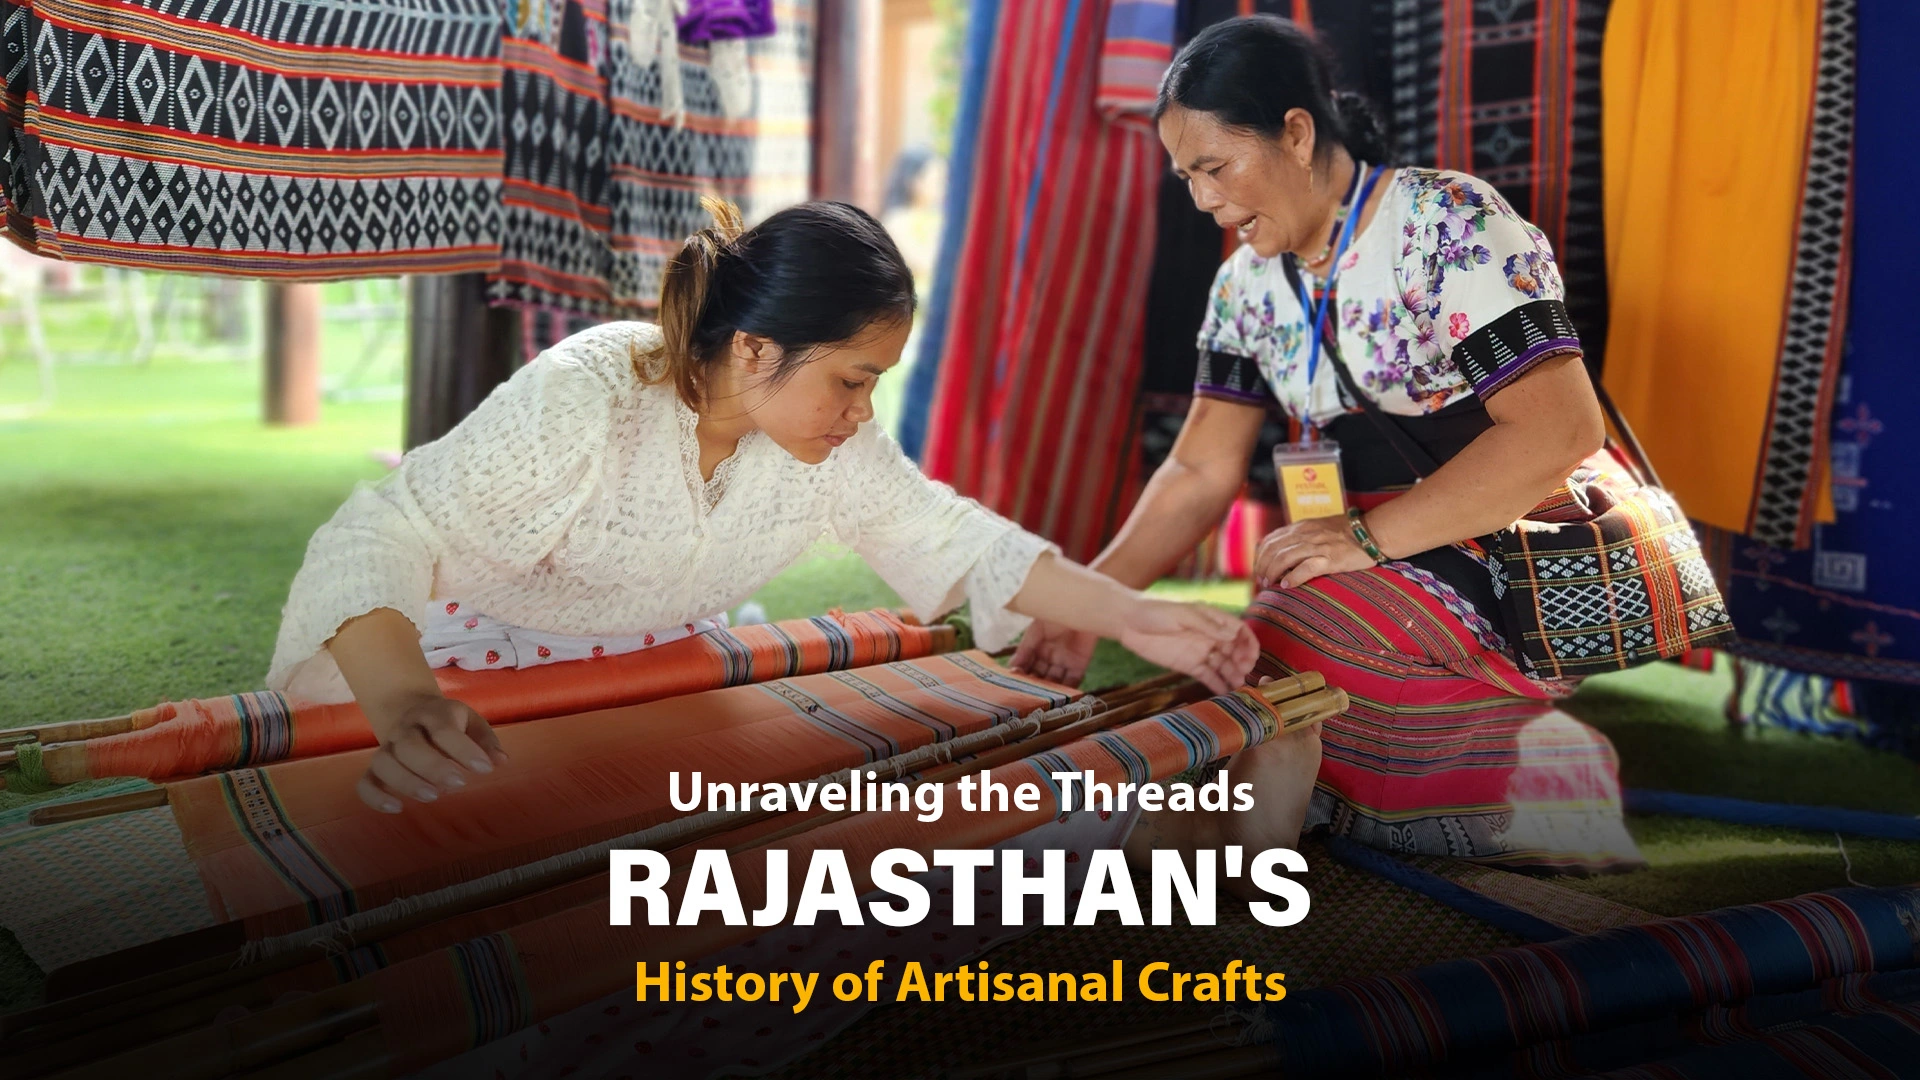 Rajasthan’s History of Artisanal Crafts : Unravelling the Threads